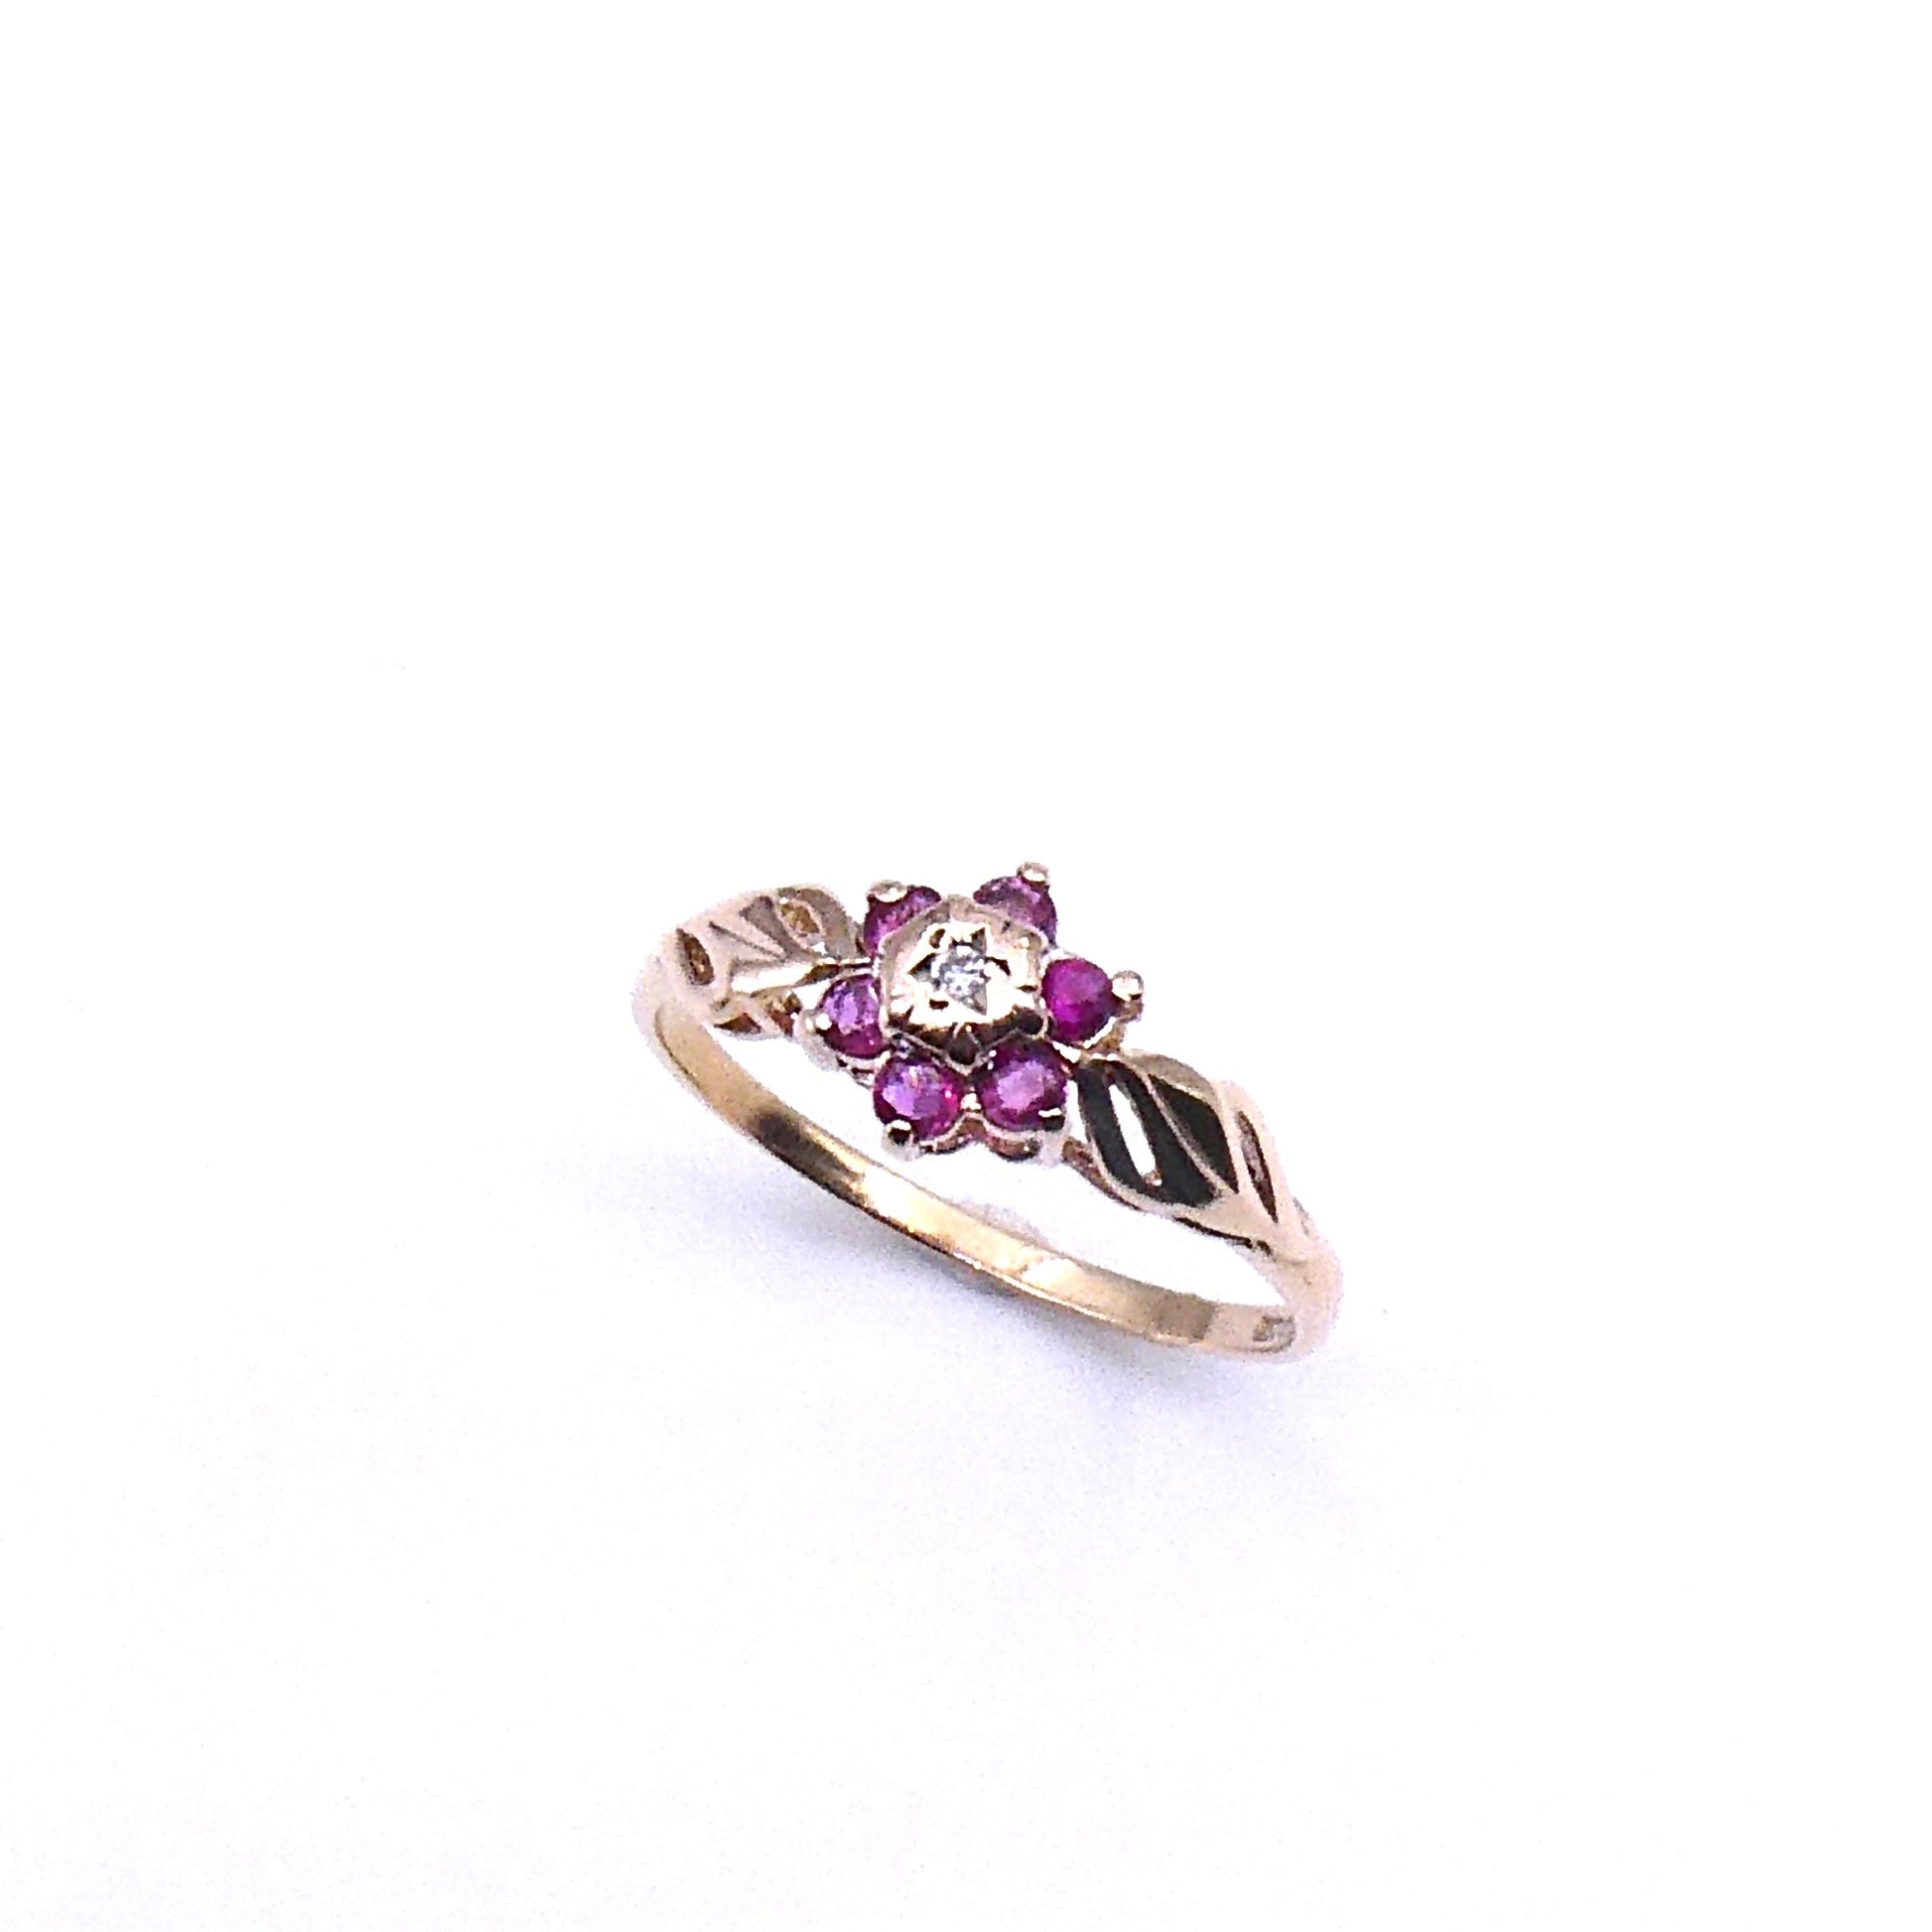 Vintage ruby diamond cluster flower ring, a delicate vintage ruby ring in 9kt gold. - Collected